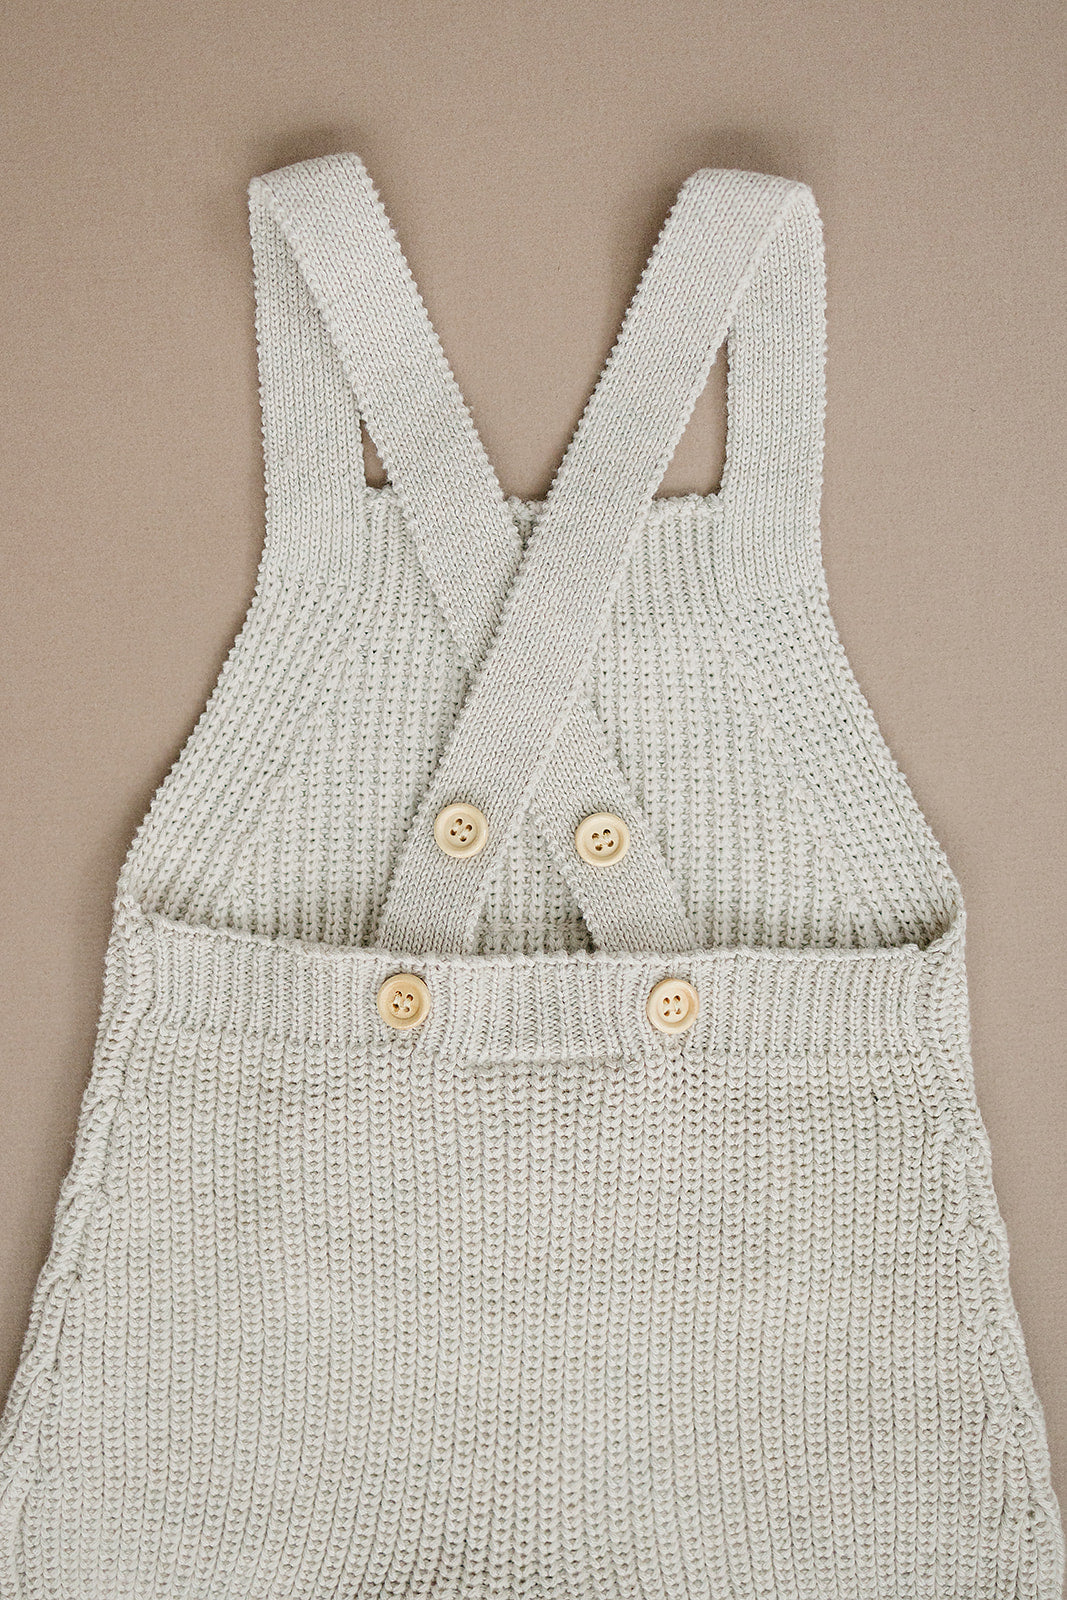 Mebie Baby Pocket Knit Overalls - Oatmeal